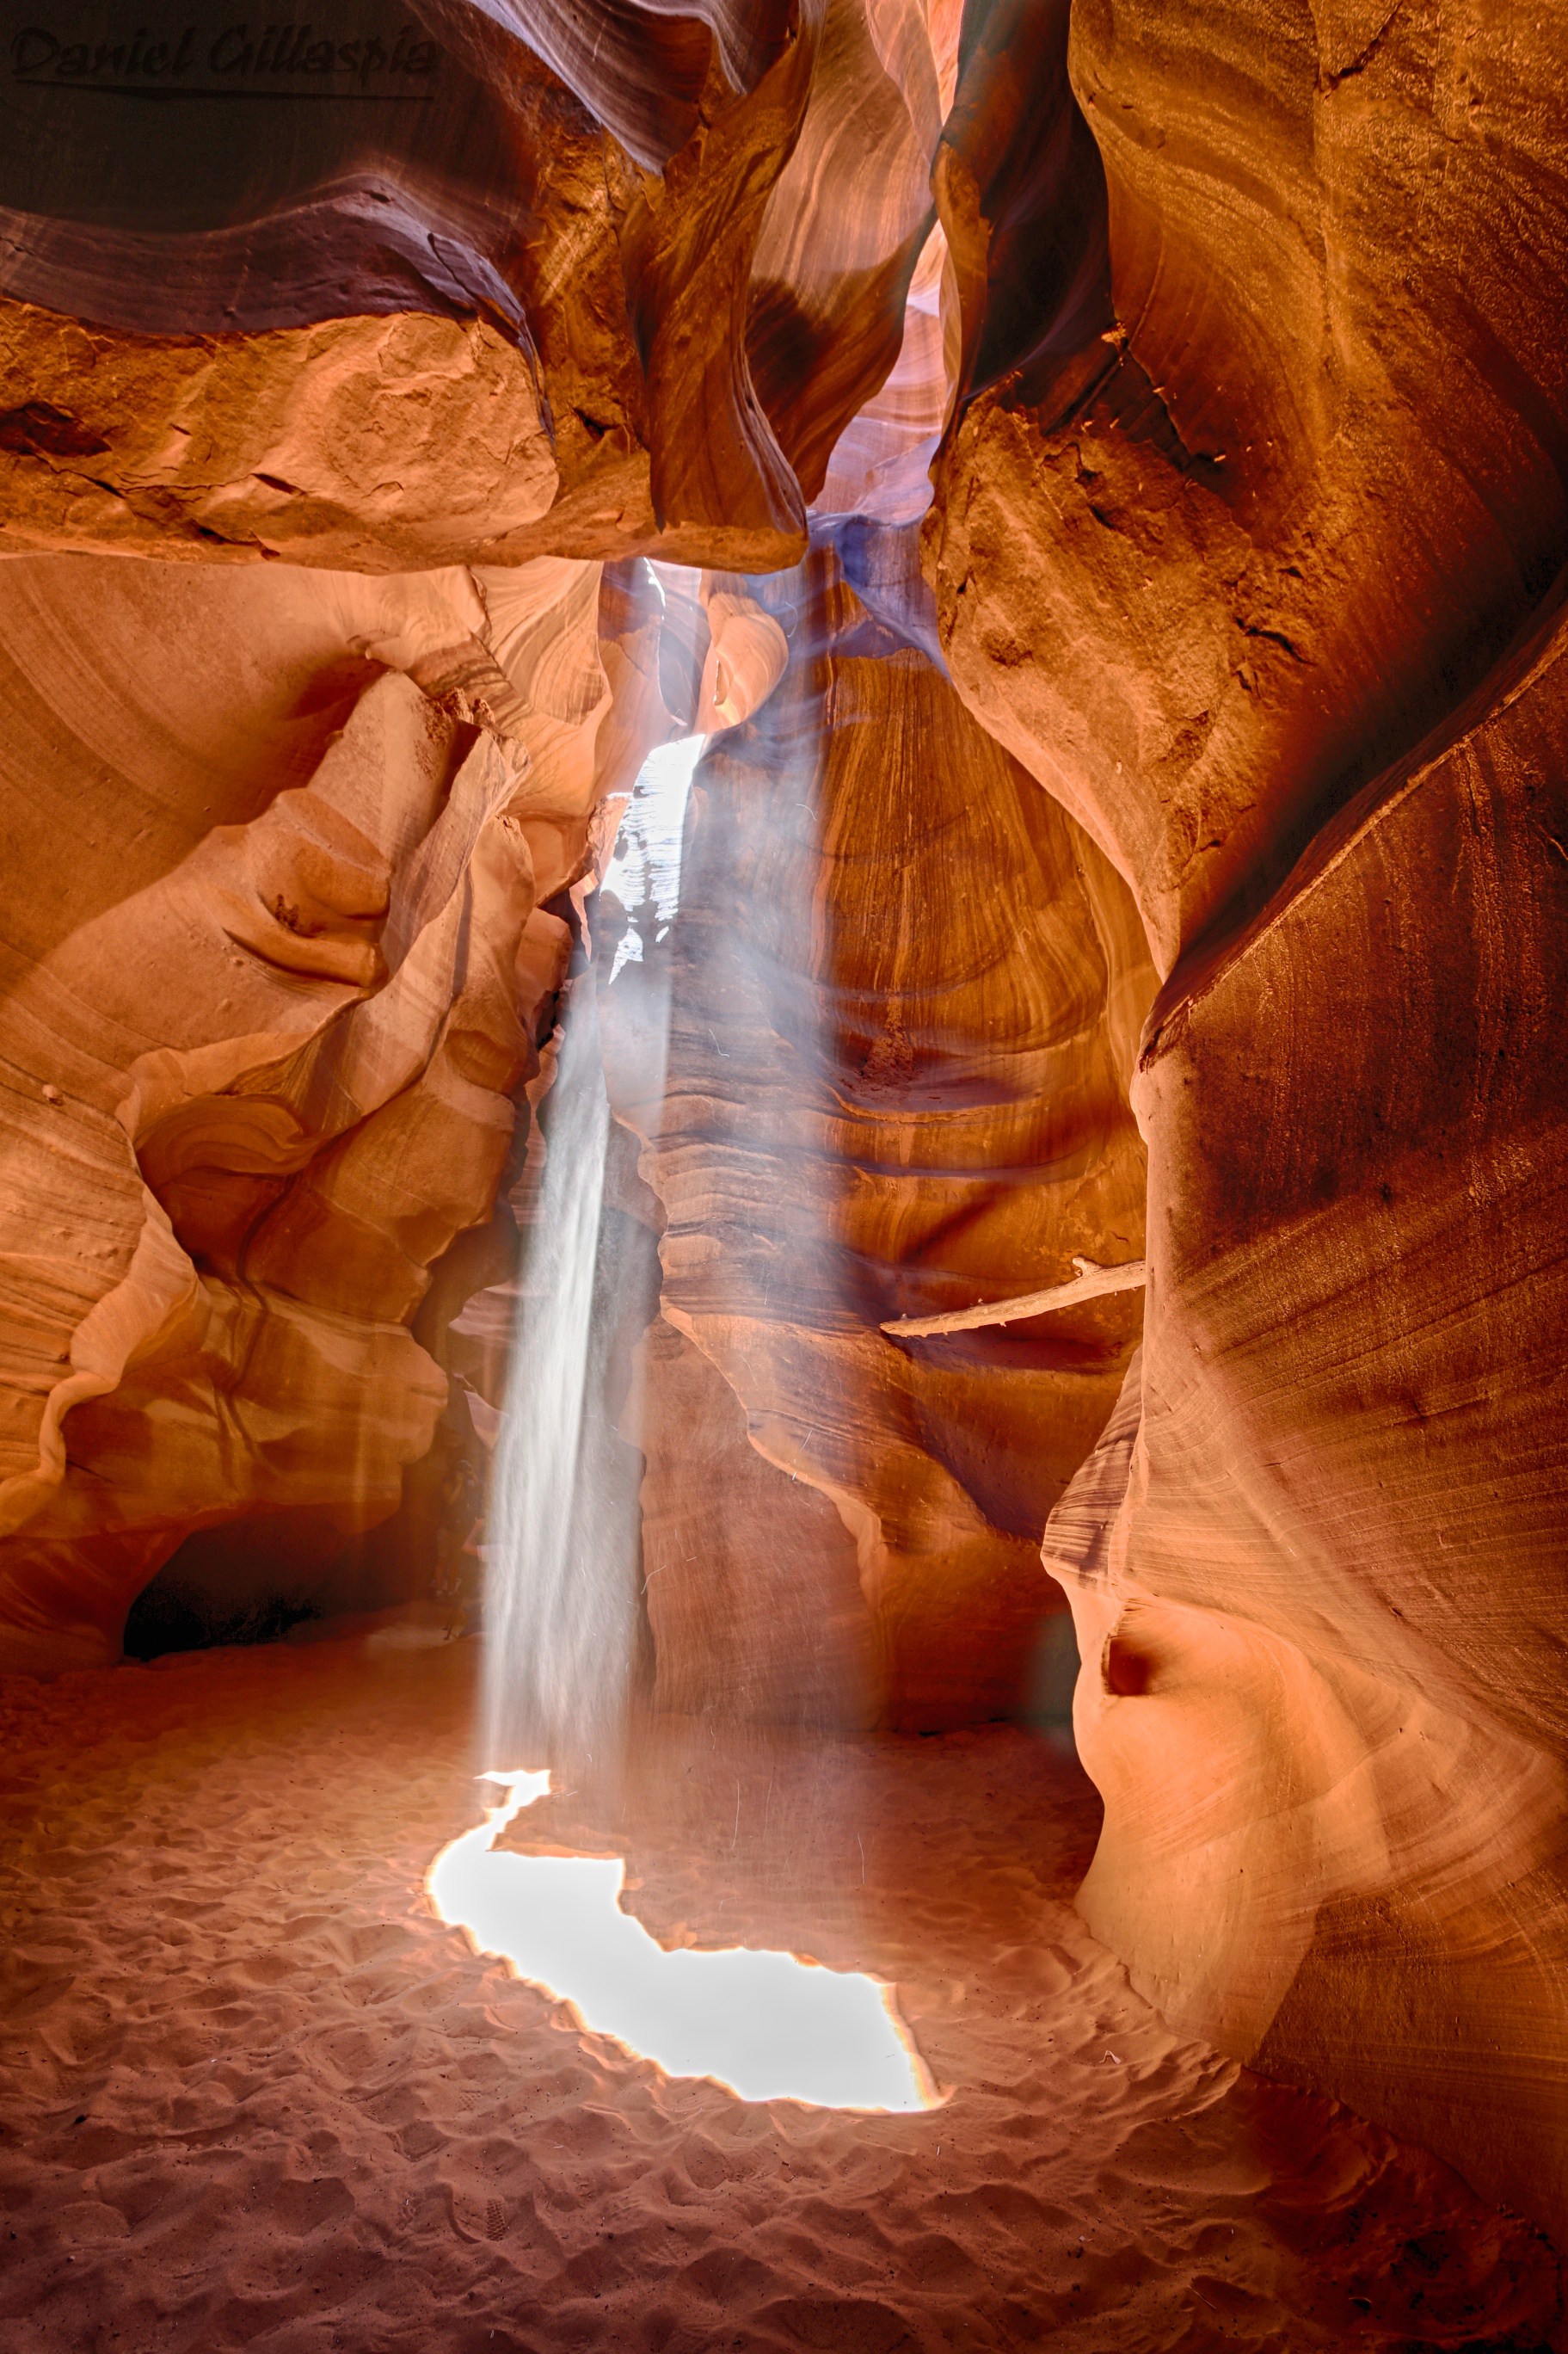 Things to Know about Visiting and Photographing Antelope Canyon